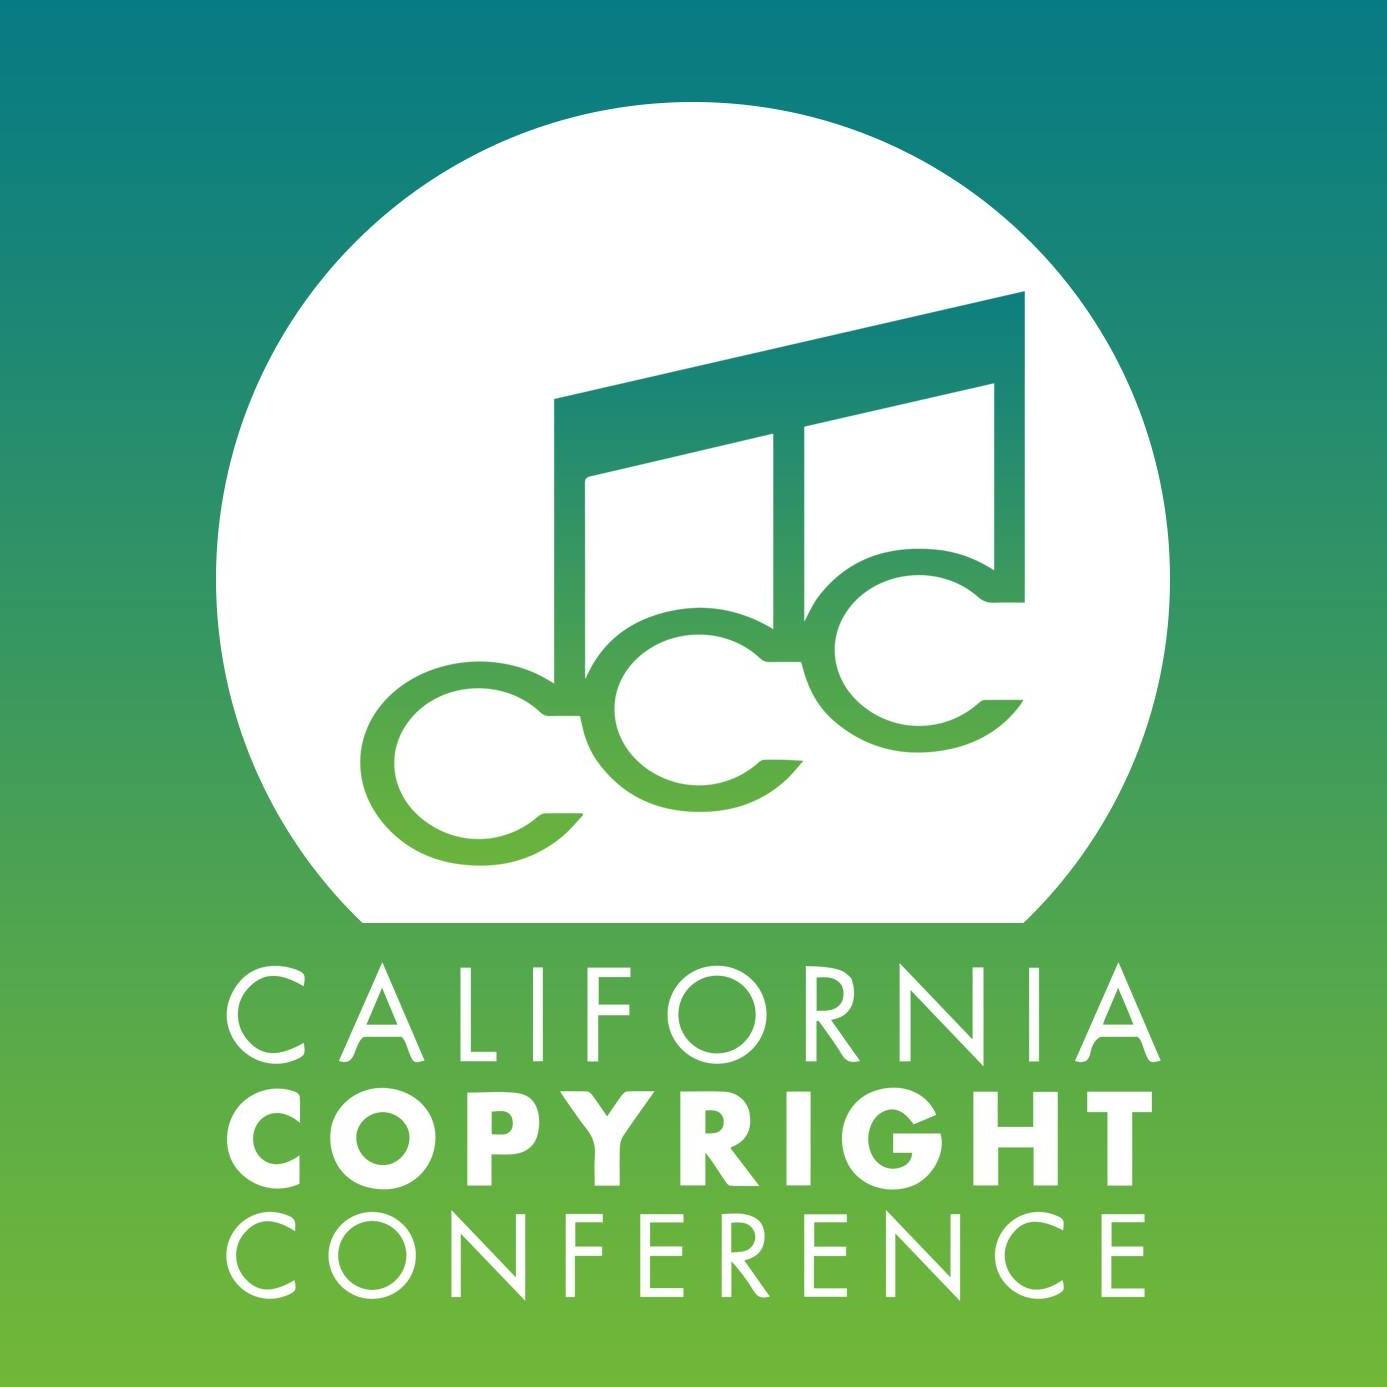 Garry Schyman and Chance Thomas At The California Copyright Conference